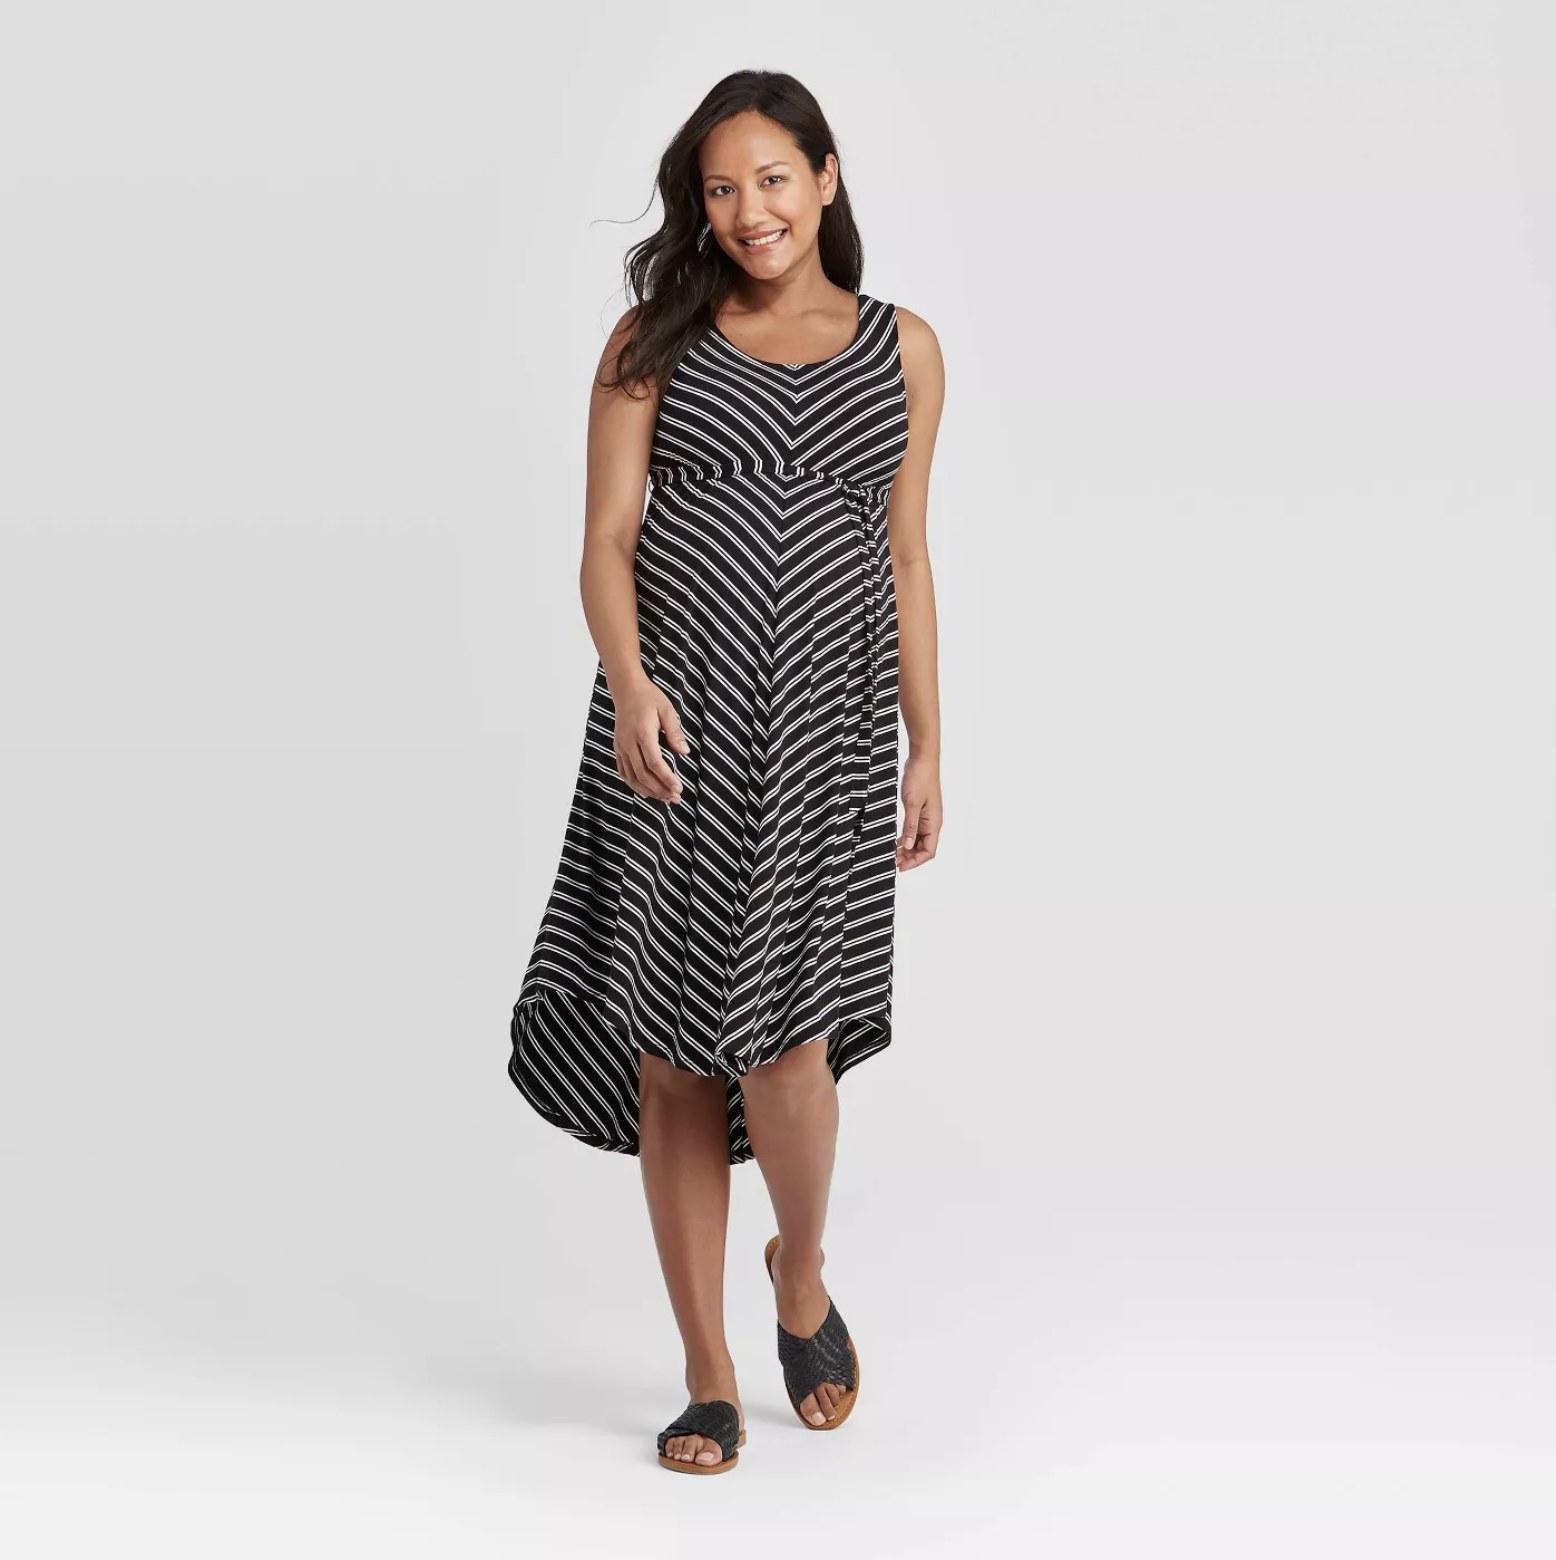 Model is wearing a black and gray striped maternity dress with thick shoulder straps, an irregular hemline, and a pair of black sandals